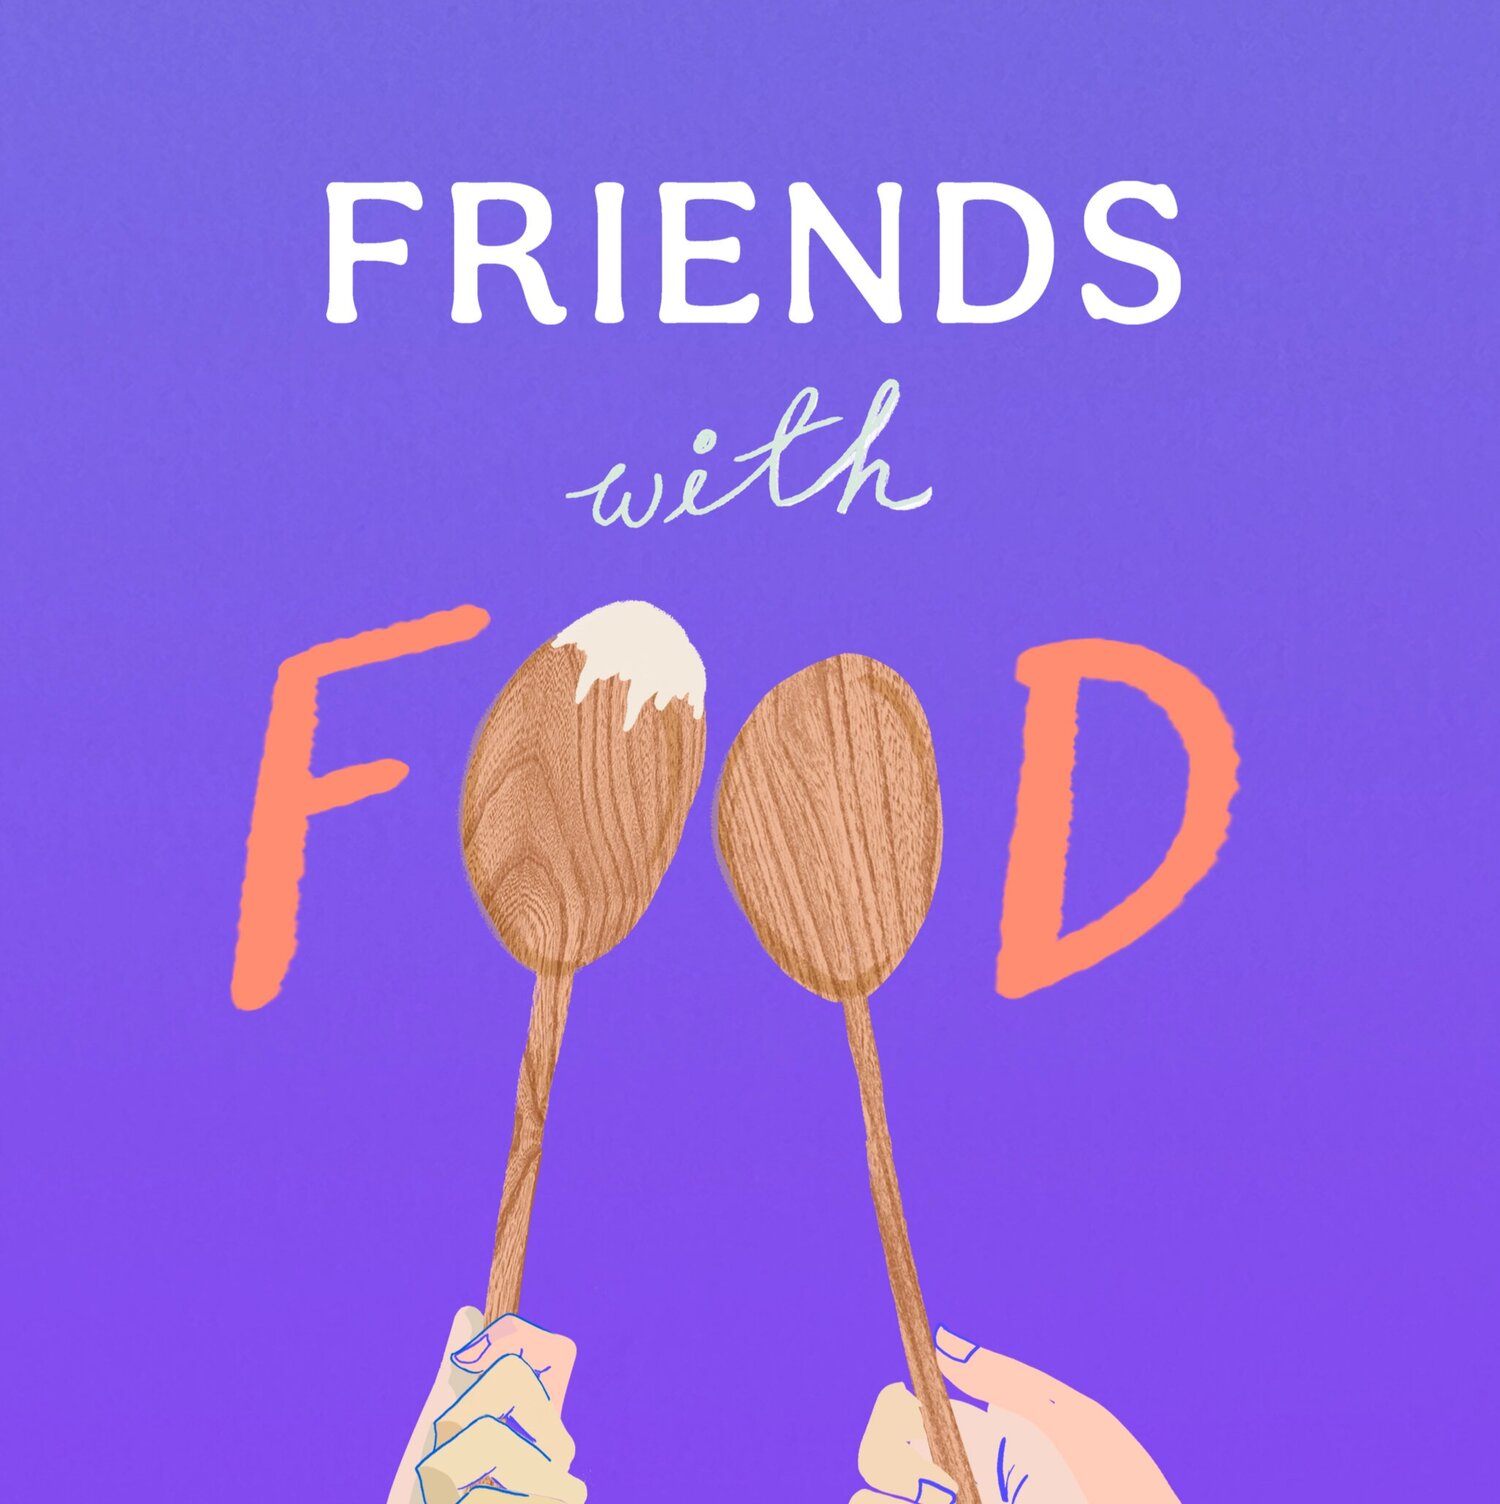 Friends With Food Podcast!